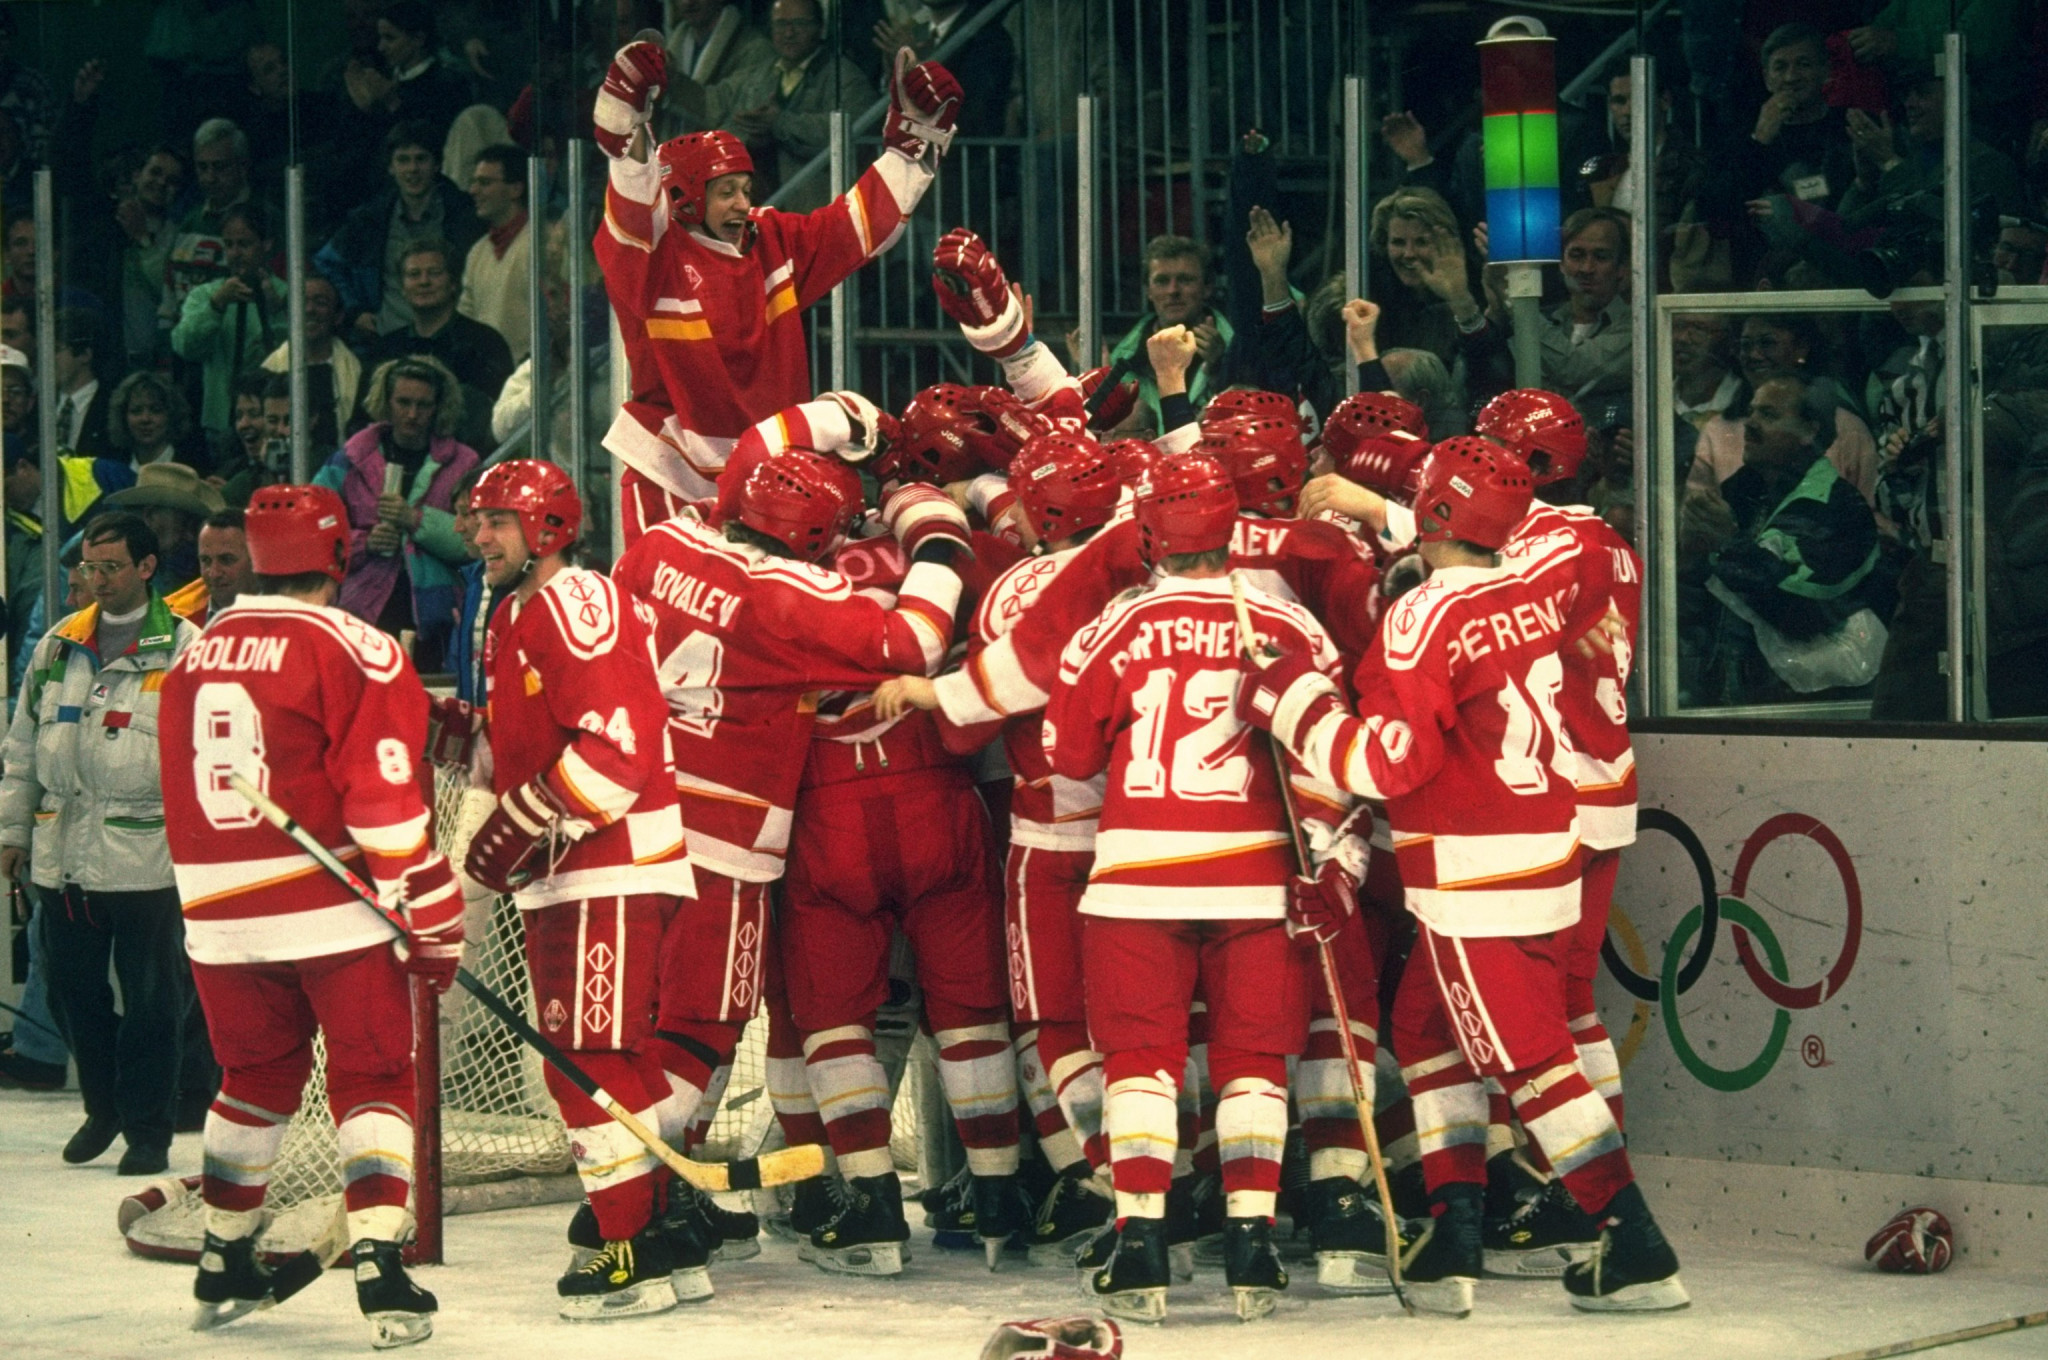 The Unified Team ice hockey side won Olympic gold at Albertville 1992 ©Getty Images